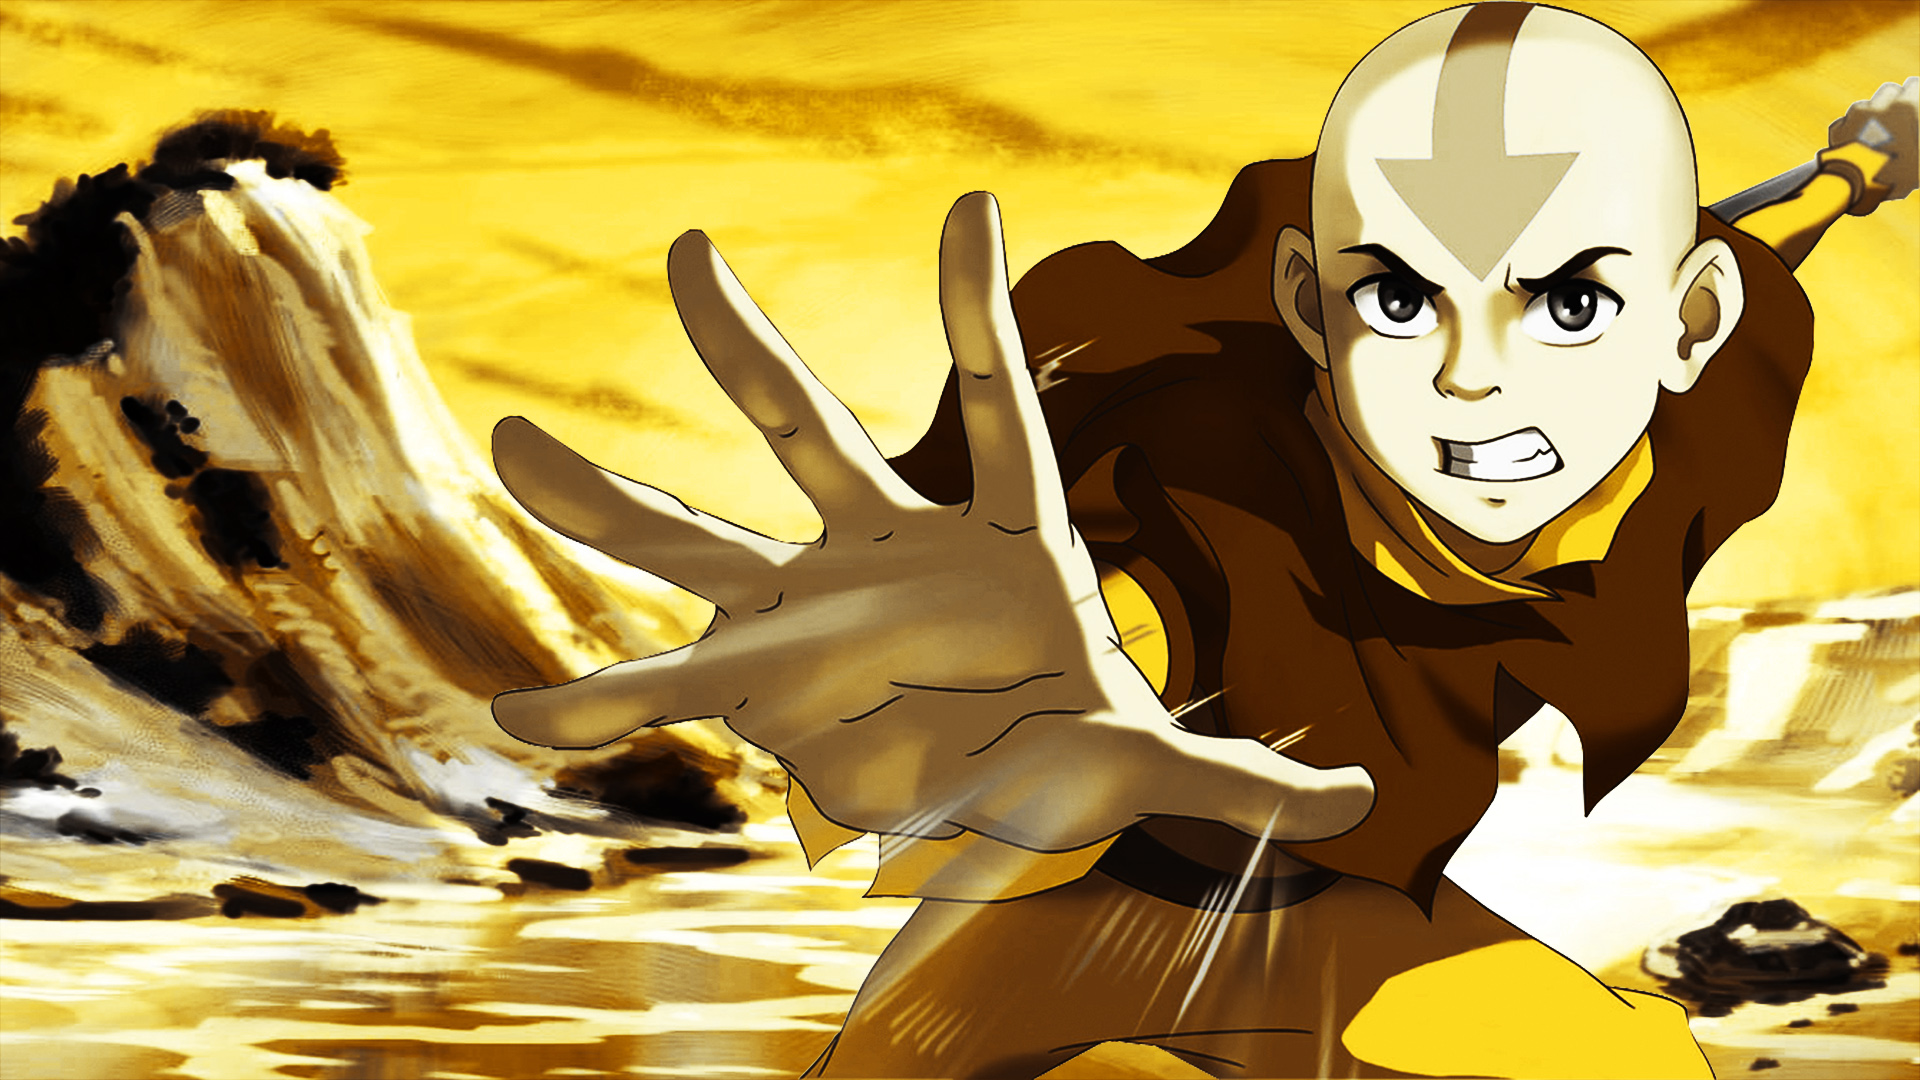 Avatar the legend of aang wallpaper 1920x1080 by dannilowGFX on